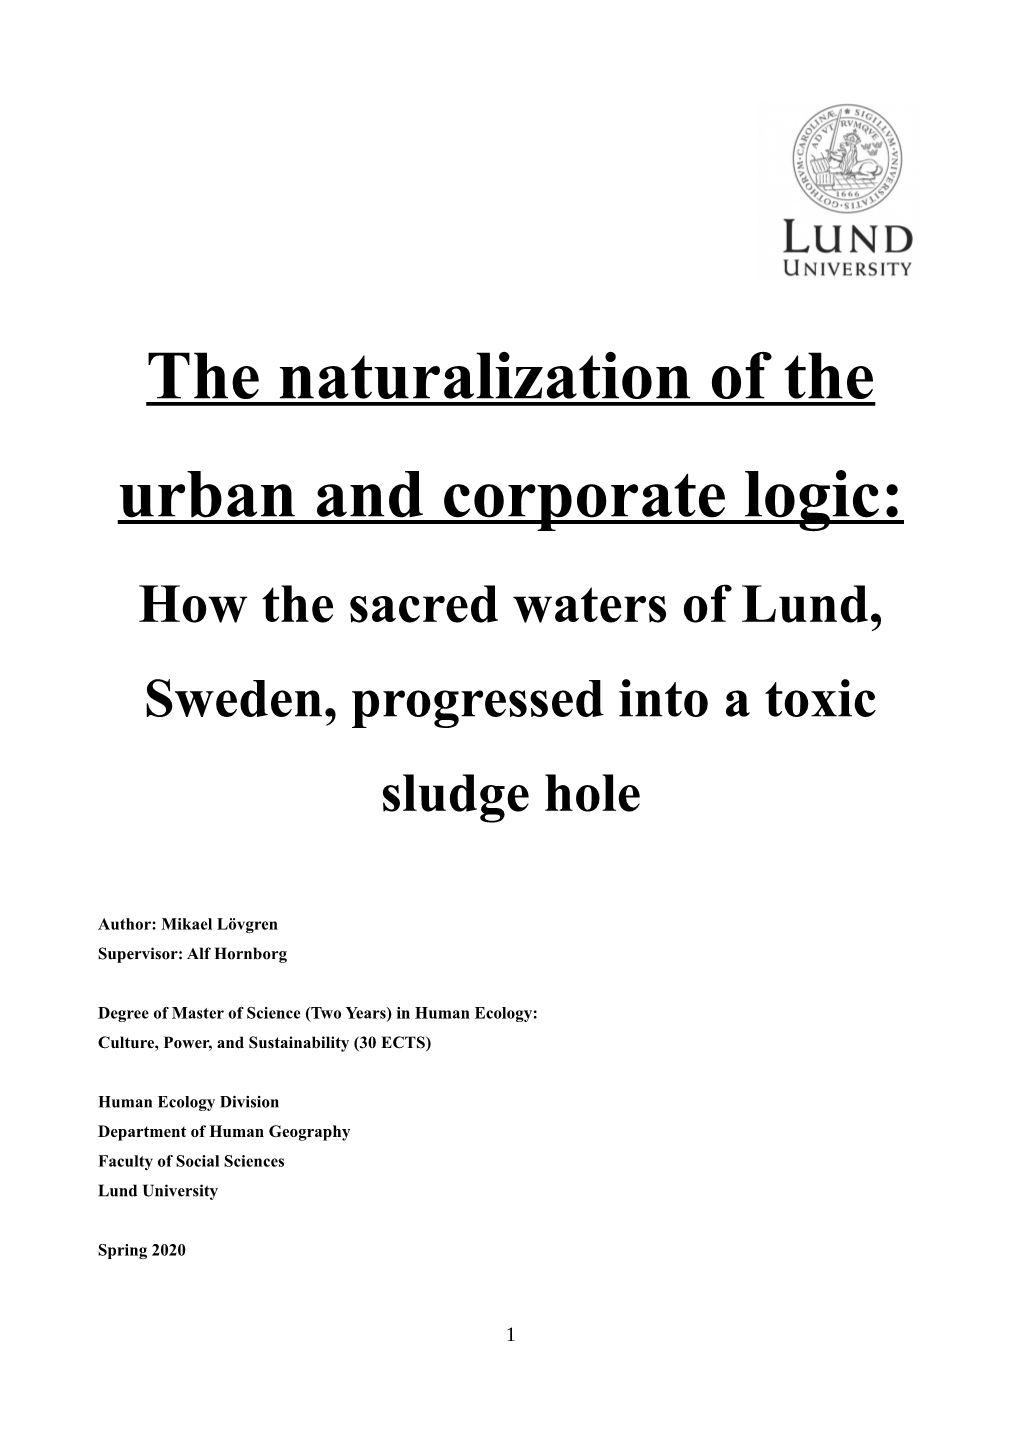 The Naturalization of the Urban and Corporate Logic: How the Sacred Waters of Lund, Sweden, Progressed Into a Toxic Sludge Hole